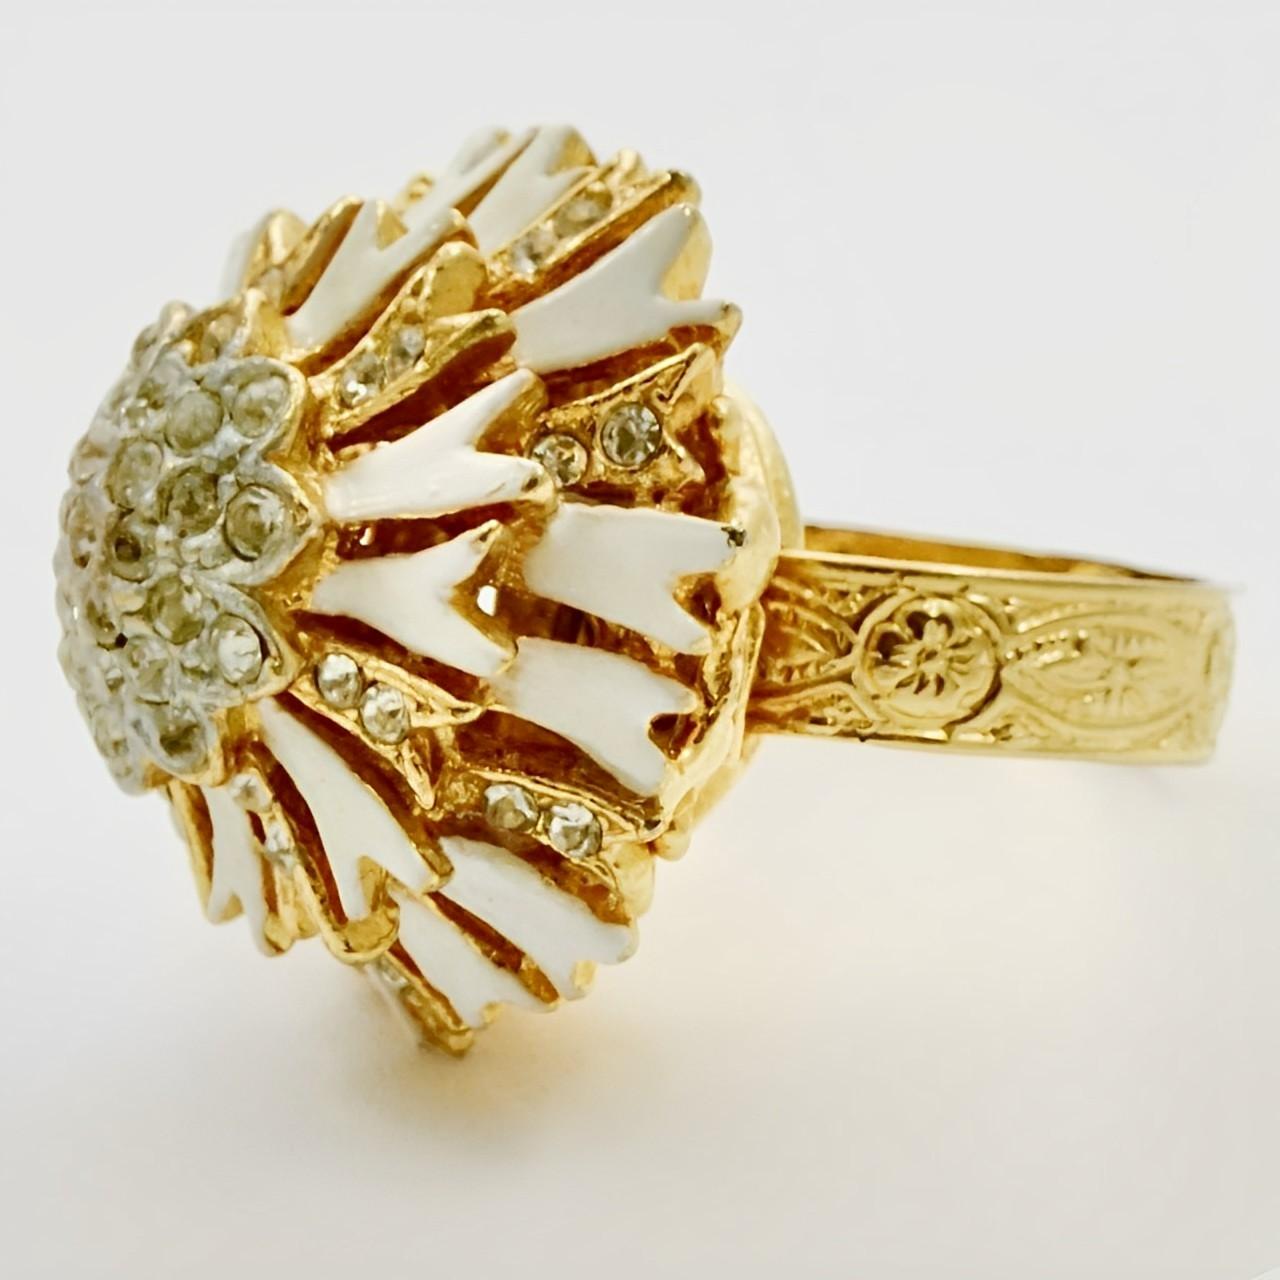 Fabulous gold plated cocktail ring with three layers of cream enamel and rhinestones. Ring size UK M / US 6, but adjustable. Measuring diameter 2.5 cm / .98 inch, and height 1.6 cm / .6 inch.

This is a beautiful and stylish cocktail statement ring